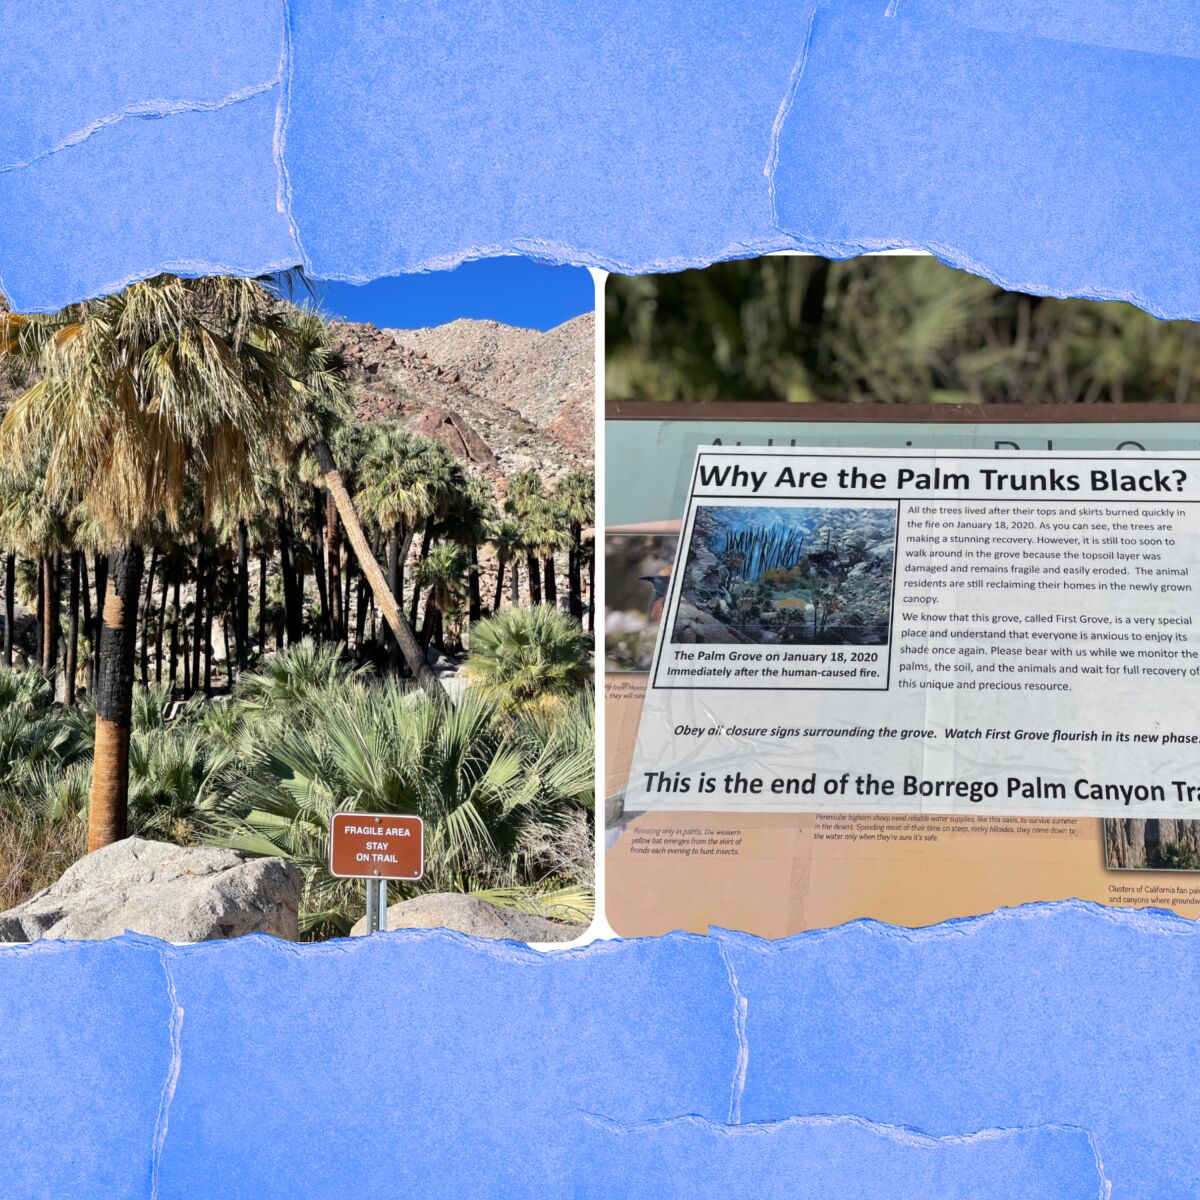 A photo of palm trees and one of posted explanatory material with the words "Why are the palm trunks black?"